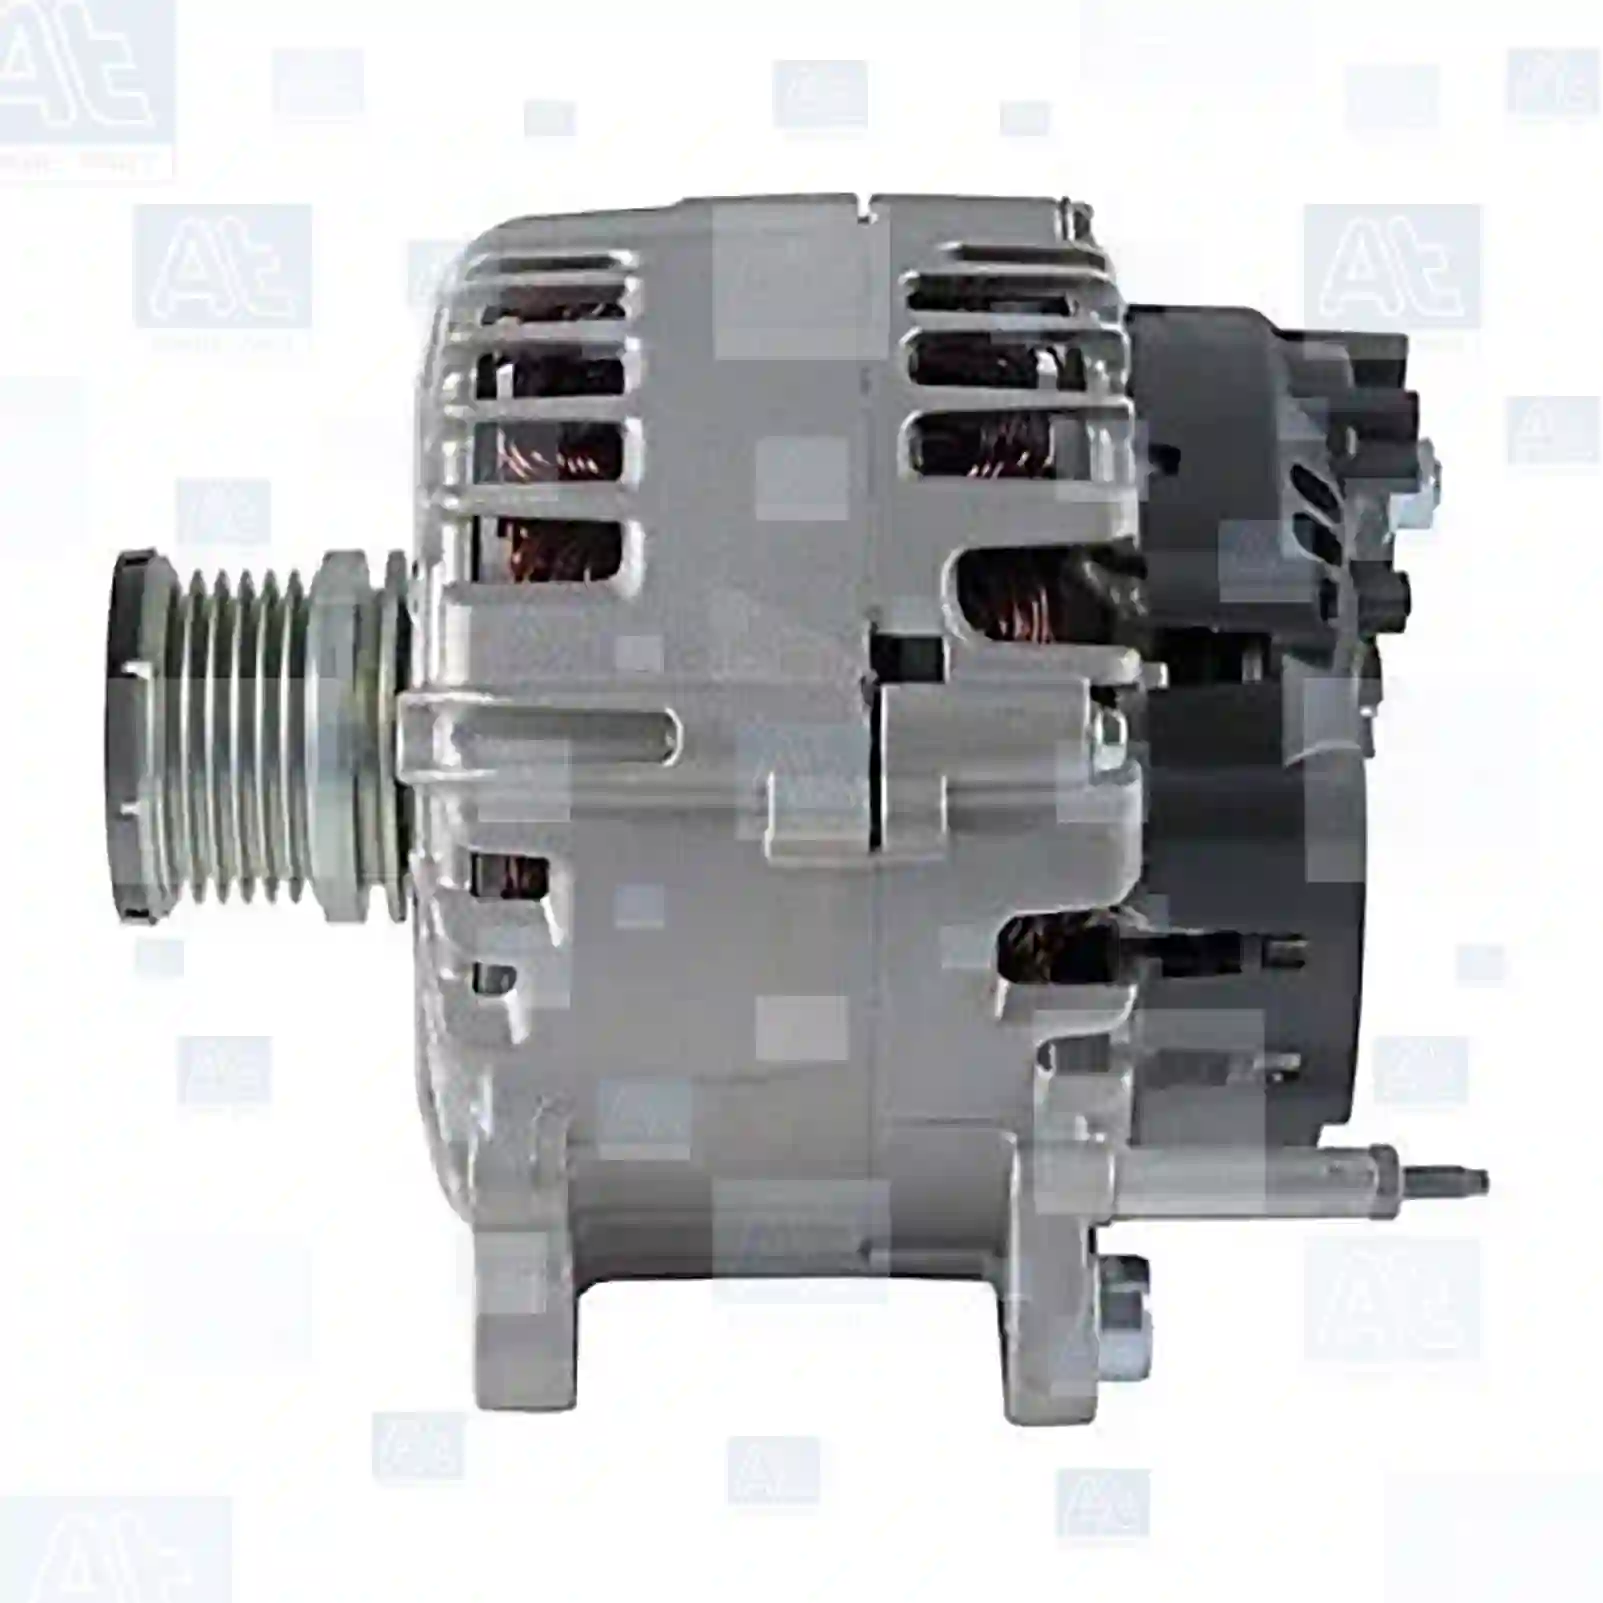 Alternator, at no 77710107, oem no: 03G903016L, 03L903023M, 03L903023N, 03L903024E, 03L903024L, 65261016004, 65261016005, 03G903016L, 03L903023M, 03L903023N, 03L903024E, 03L903024L, 03G903016L, 03G903016LX, 03L903023M, 03L903023MX, 03L903023N, 03L903023NX, 03L903024E, 03L903024L, 03L903024LX, 03L903024N, 03L903024NX, 04L903024A At Spare Part | Engine, Accelerator Pedal, Camshaft, Connecting Rod, Crankcase, Crankshaft, Cylinder Head, Engine Suspension Mountings, Exhaust Manifold, Exhaust Gas Recirculation, Filter Kits, Flywheel Housing, General Overhaul Kits, Engine, Intake Manifold, Oil Cleaner, Oil Cooler, Oil Filter, Oil Pump, Oil Sump, Piston & Liner, Sensor & Switch, Timing Case, Turbocharger, Cooling System, Belt Tensioner, Coolant Filter, Coolant Pipe, Corrosion Prevention Agent, Drive, Expansion Tank, Fan, Intercooler, Monitors & Gauges, Radiator, Thermostat, V-Belt / Timing belt, Water Pump, Fuel System, Electronical Injector Unit, Feed Pump, Fuel Filter, cpl., Fuel Gauge Sender,  Fuel Line, Fuel Pump, Fuel Tank, Injection Line Kit, Injection Pump, Exhaust System, Clutch & Pedal, Gearbox, Propeller Shaft, Axles, Brake System, Hubs & Wheels, Suspension, Leaf Spring, Universal Parts / Accessories, Steering, Electrical System, Cabin Alternator, at no 77710107, oem no: 03G903016L, 03L903023M, 03L903023N, 03L903024E, 03L903024L, 65261016004, 65261016005, 03G903016L, 03L903023M, 03L903023N, 03L903024E, 03L903024L, 03G903016L, 03G903016LX, 03L903023M, 03L903023MX, 03L903023N, 03L903023NX, 03L903024E, 03L903024L, 03L903024LX, 03L903024N, 03L903024NX, 04L903024A At Spare Part | Engine, Accelerator Pedal, Camshaft, Connecting Rod, Crankcase, Crankshaft, Cylinder Head, Engine Suspension Mountings, Exhaust Manifold, Exhaust Gas Recirculation, Filter Kits, Flywheel Housing, General Overhaul Kits, Engine, Intake Manifold, Oil Cleaner, Oil Cooler, Oil Filter, Oil Pump, Oil Sump, Piston & Liner, Sensor & Switch, Timing Case, Turbocharger, Cooling System, Belt Tensioner, Coolant Filter, Coolant Pipe, Corrosion Prevention Agent, Drive, Expansion Tank, Fan, Intercooler, Monitors & Gauges, Radiator, Thermostat, V-Belt / Timing belt, Water Pump, Fuel System, Electronical Injector Unit, Feed Pump, Fuel Filter, cpl., Fuel Gauge Sender,  Fuel Line, Fuel Pump, Fuel Tank, Injection Line Kit, Injection Pump, Exhaust System, Clutch & Pedal, Gearbox, Propeller Shaft, Axles, Brake System, Hubs & Wheels, Suspension, Leaf Spring, Universal Parts / Accessories, Steering, Electrical System, Cabin